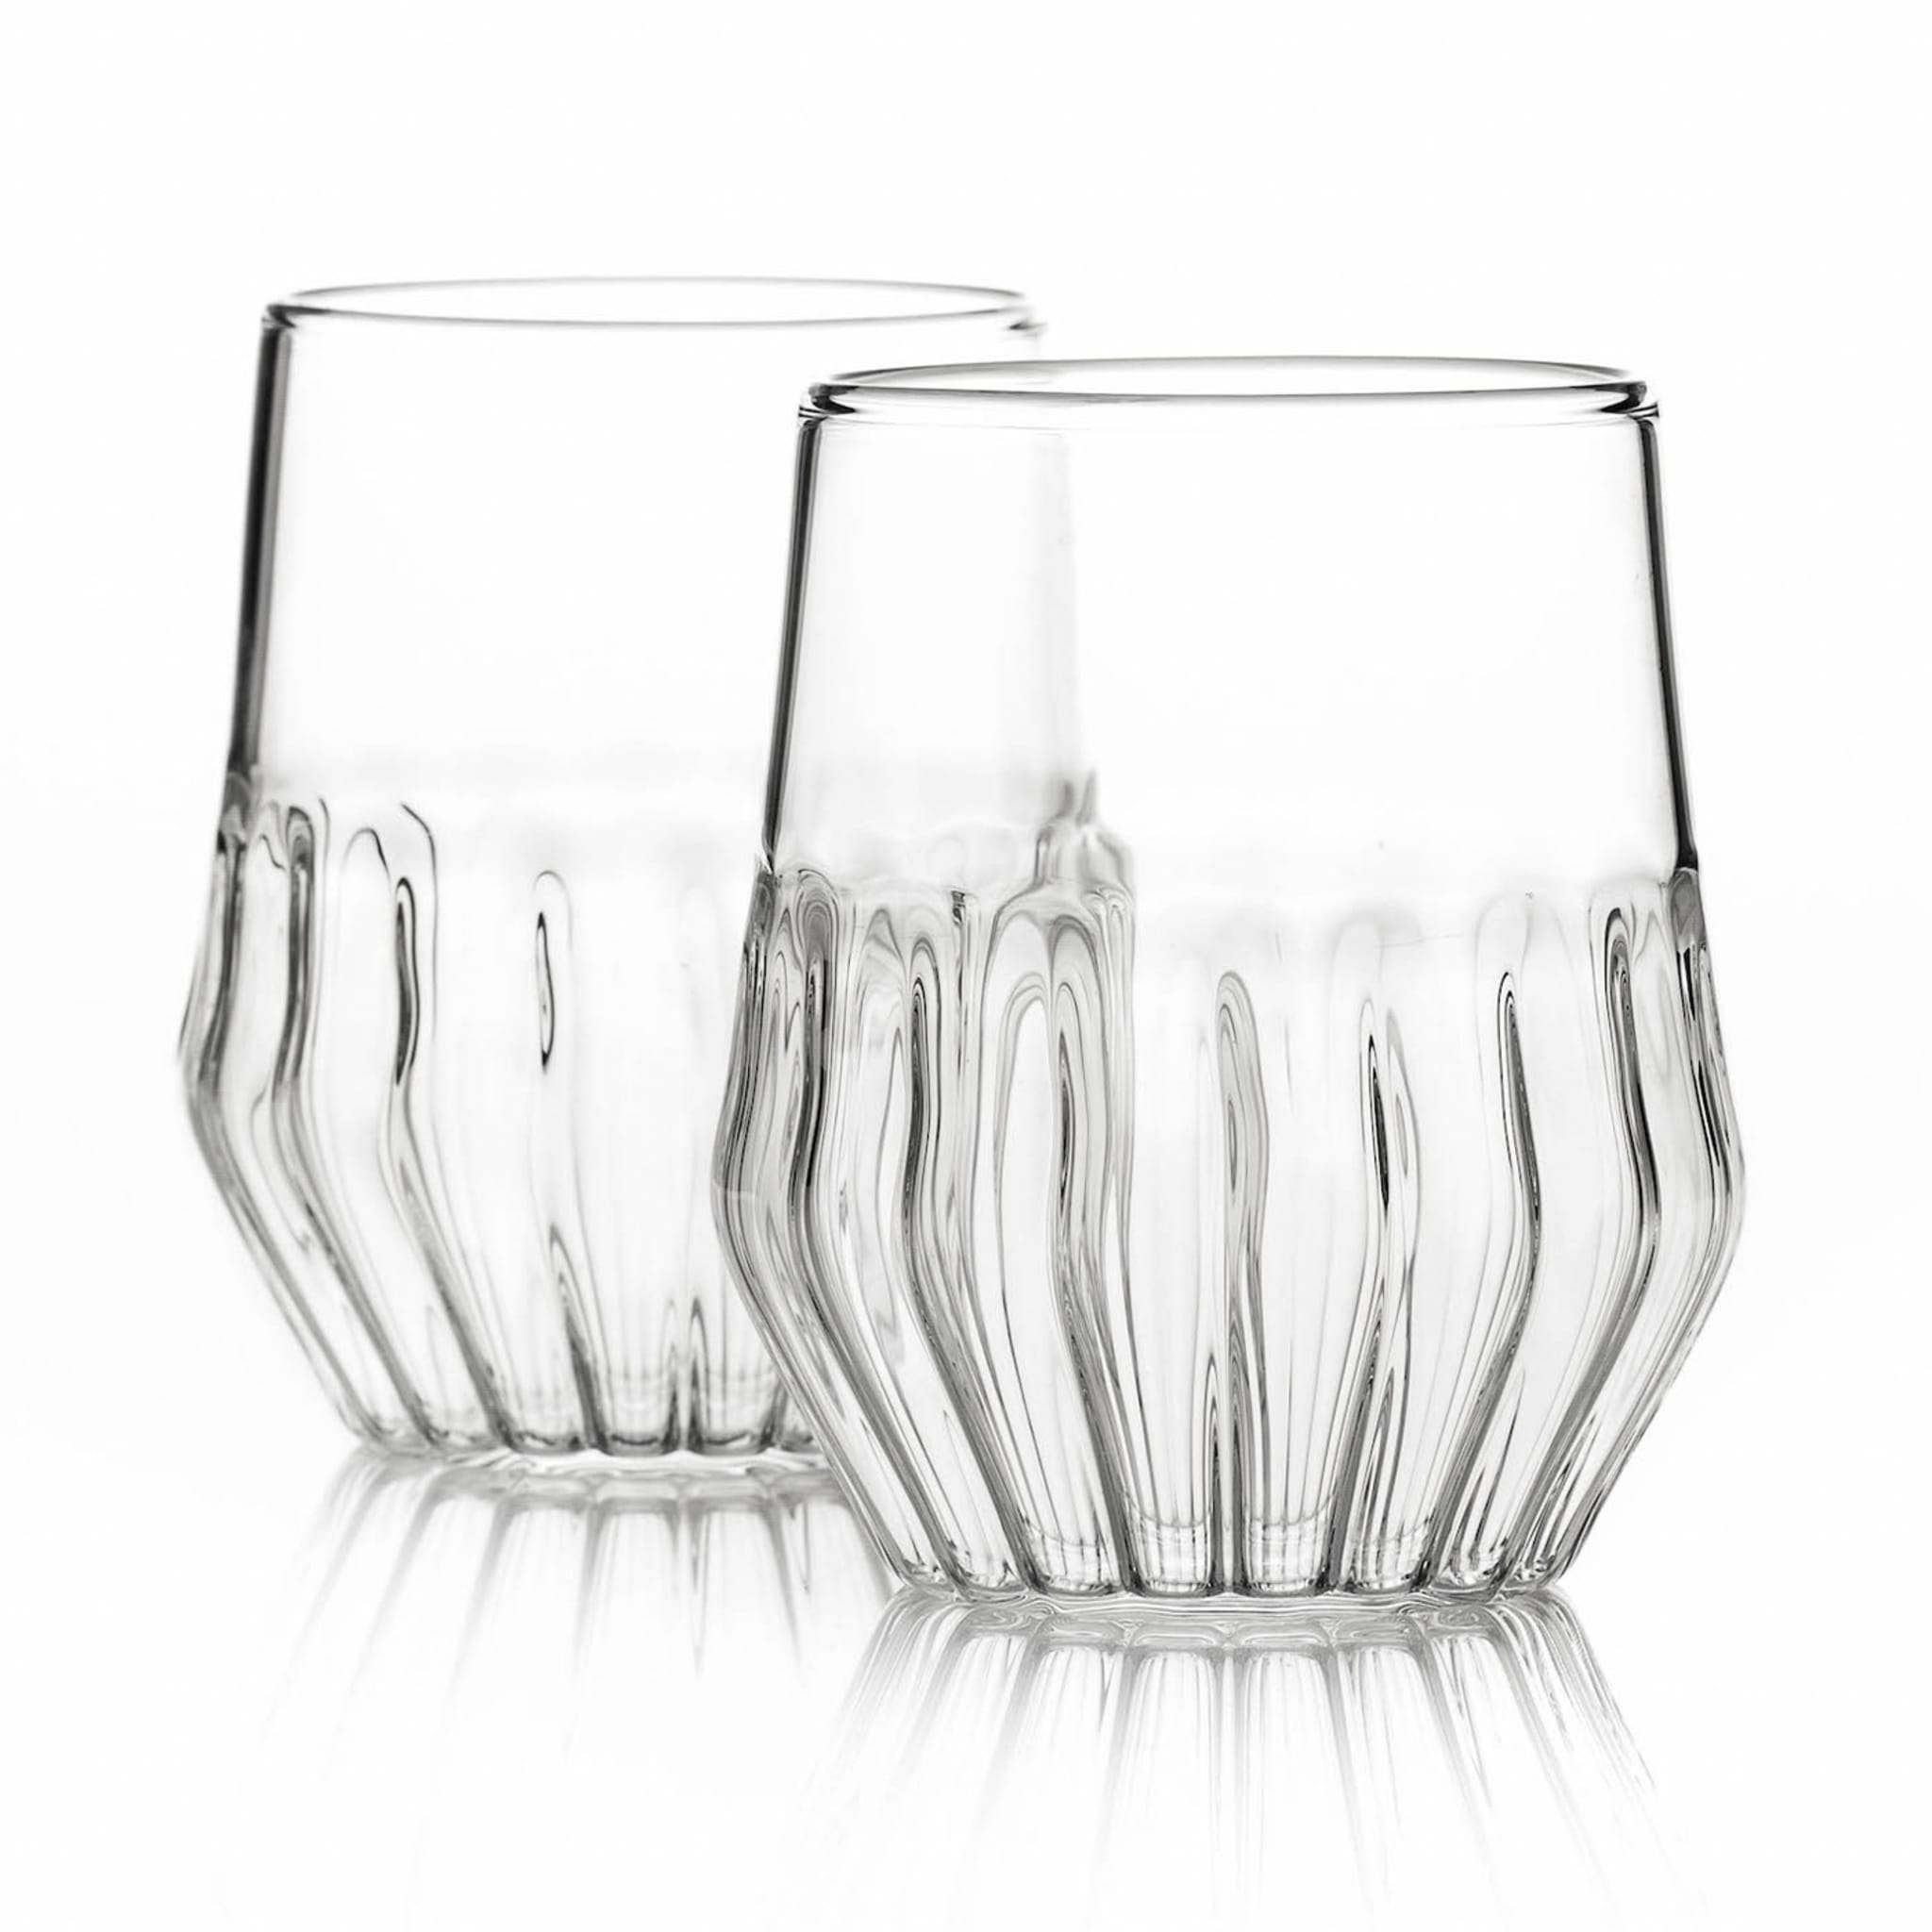 Set of 2 Mixed Small Glasses - Alternative view 1